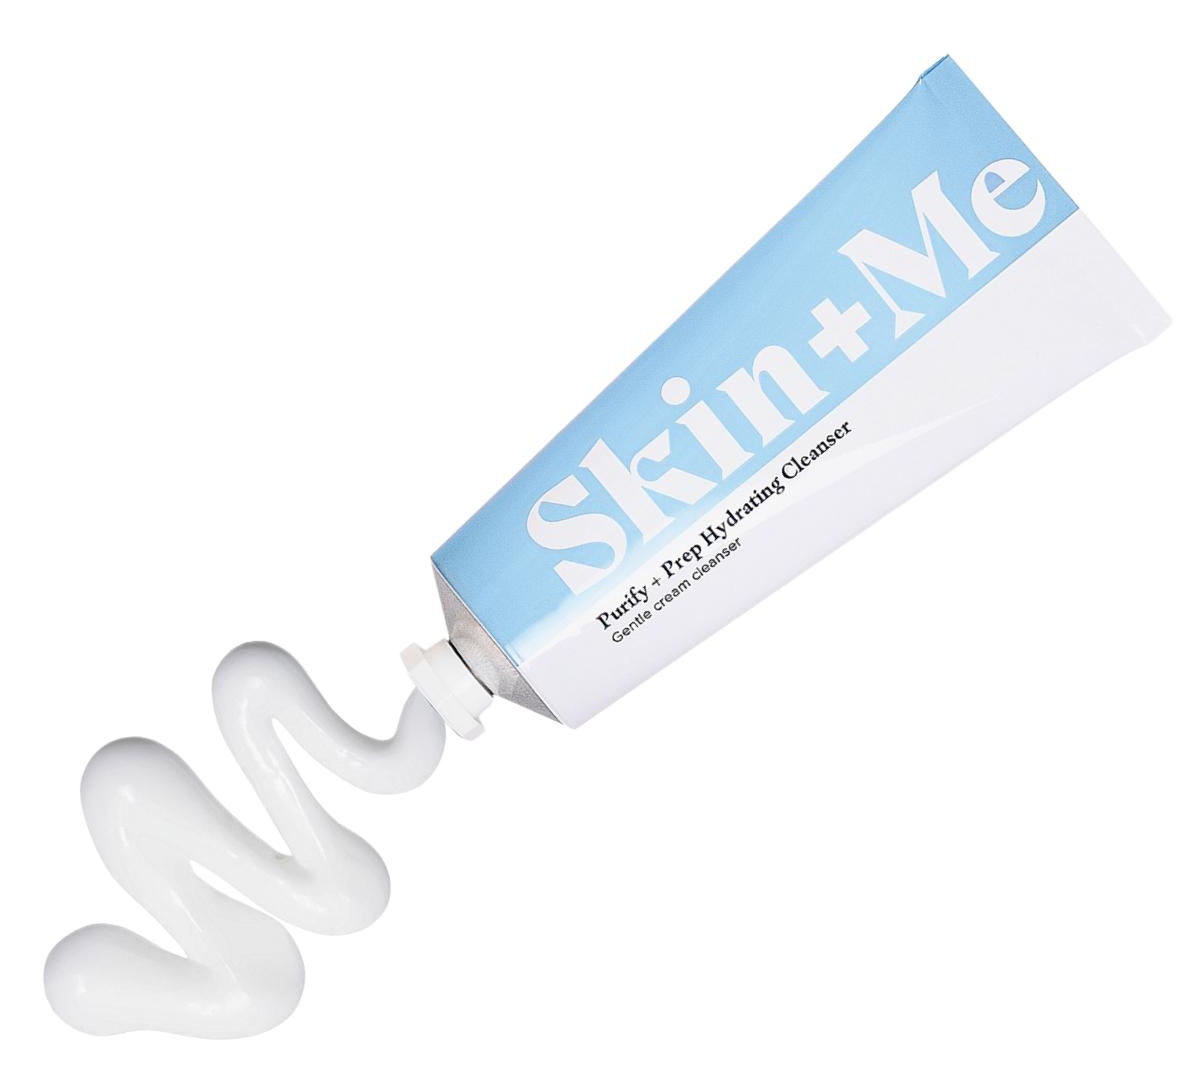 Skin + Me Purify + Prep Hydrating Cleanser